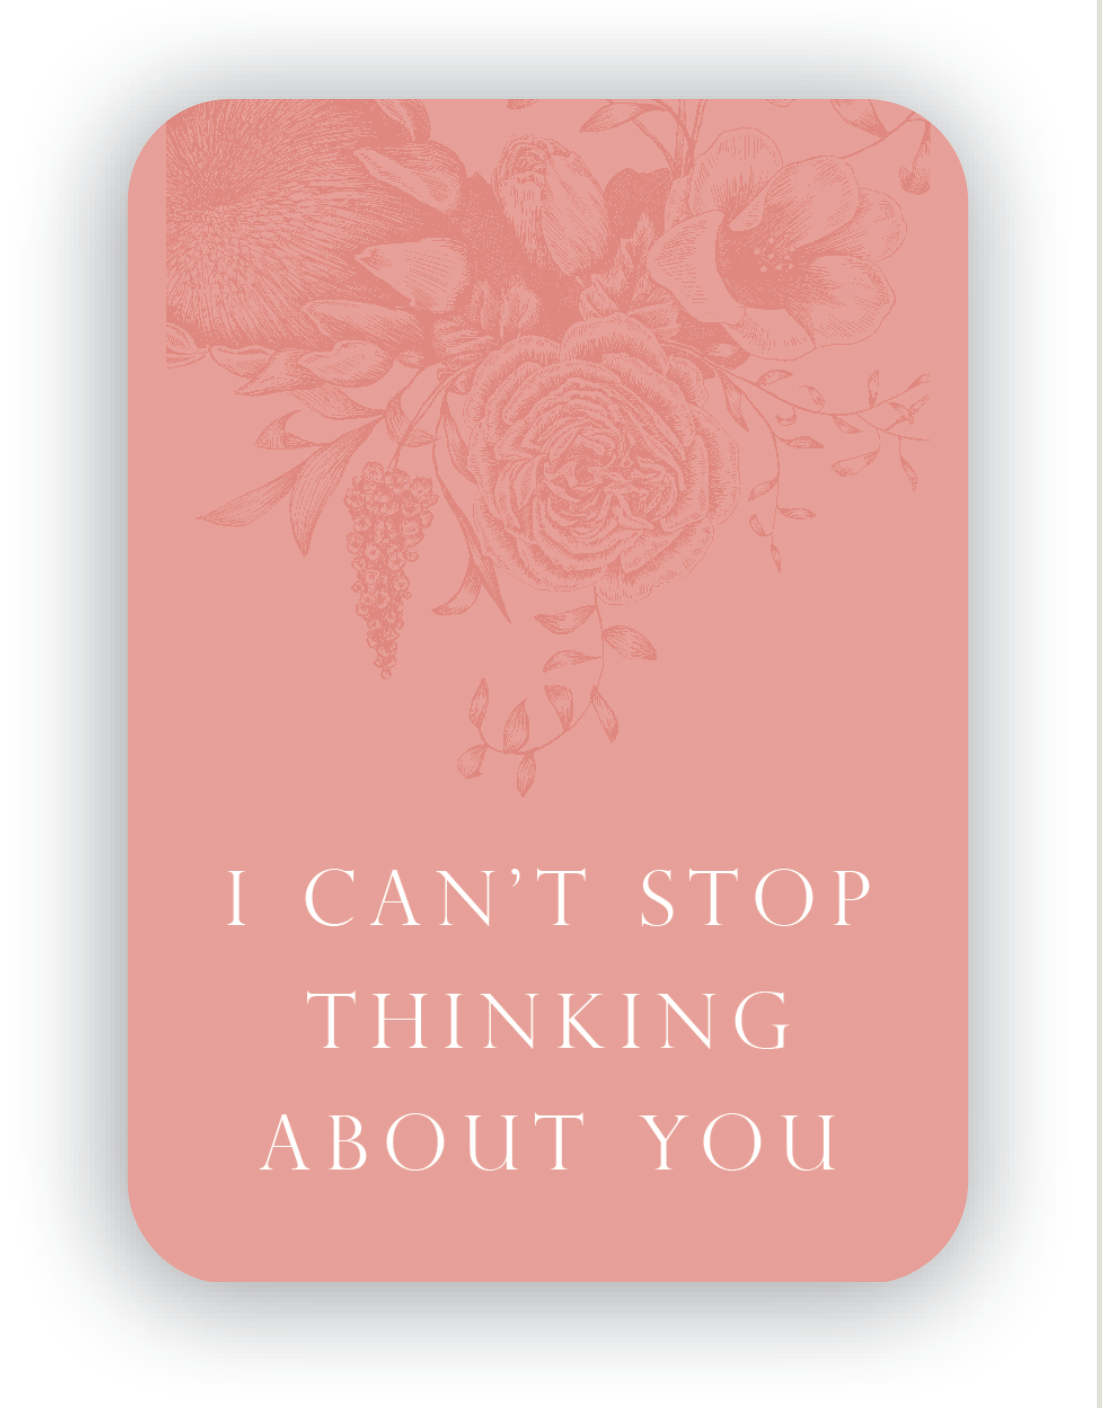 Digital coral mini card with florals that says "I can't stop thinking about you" by Rust Belt Love